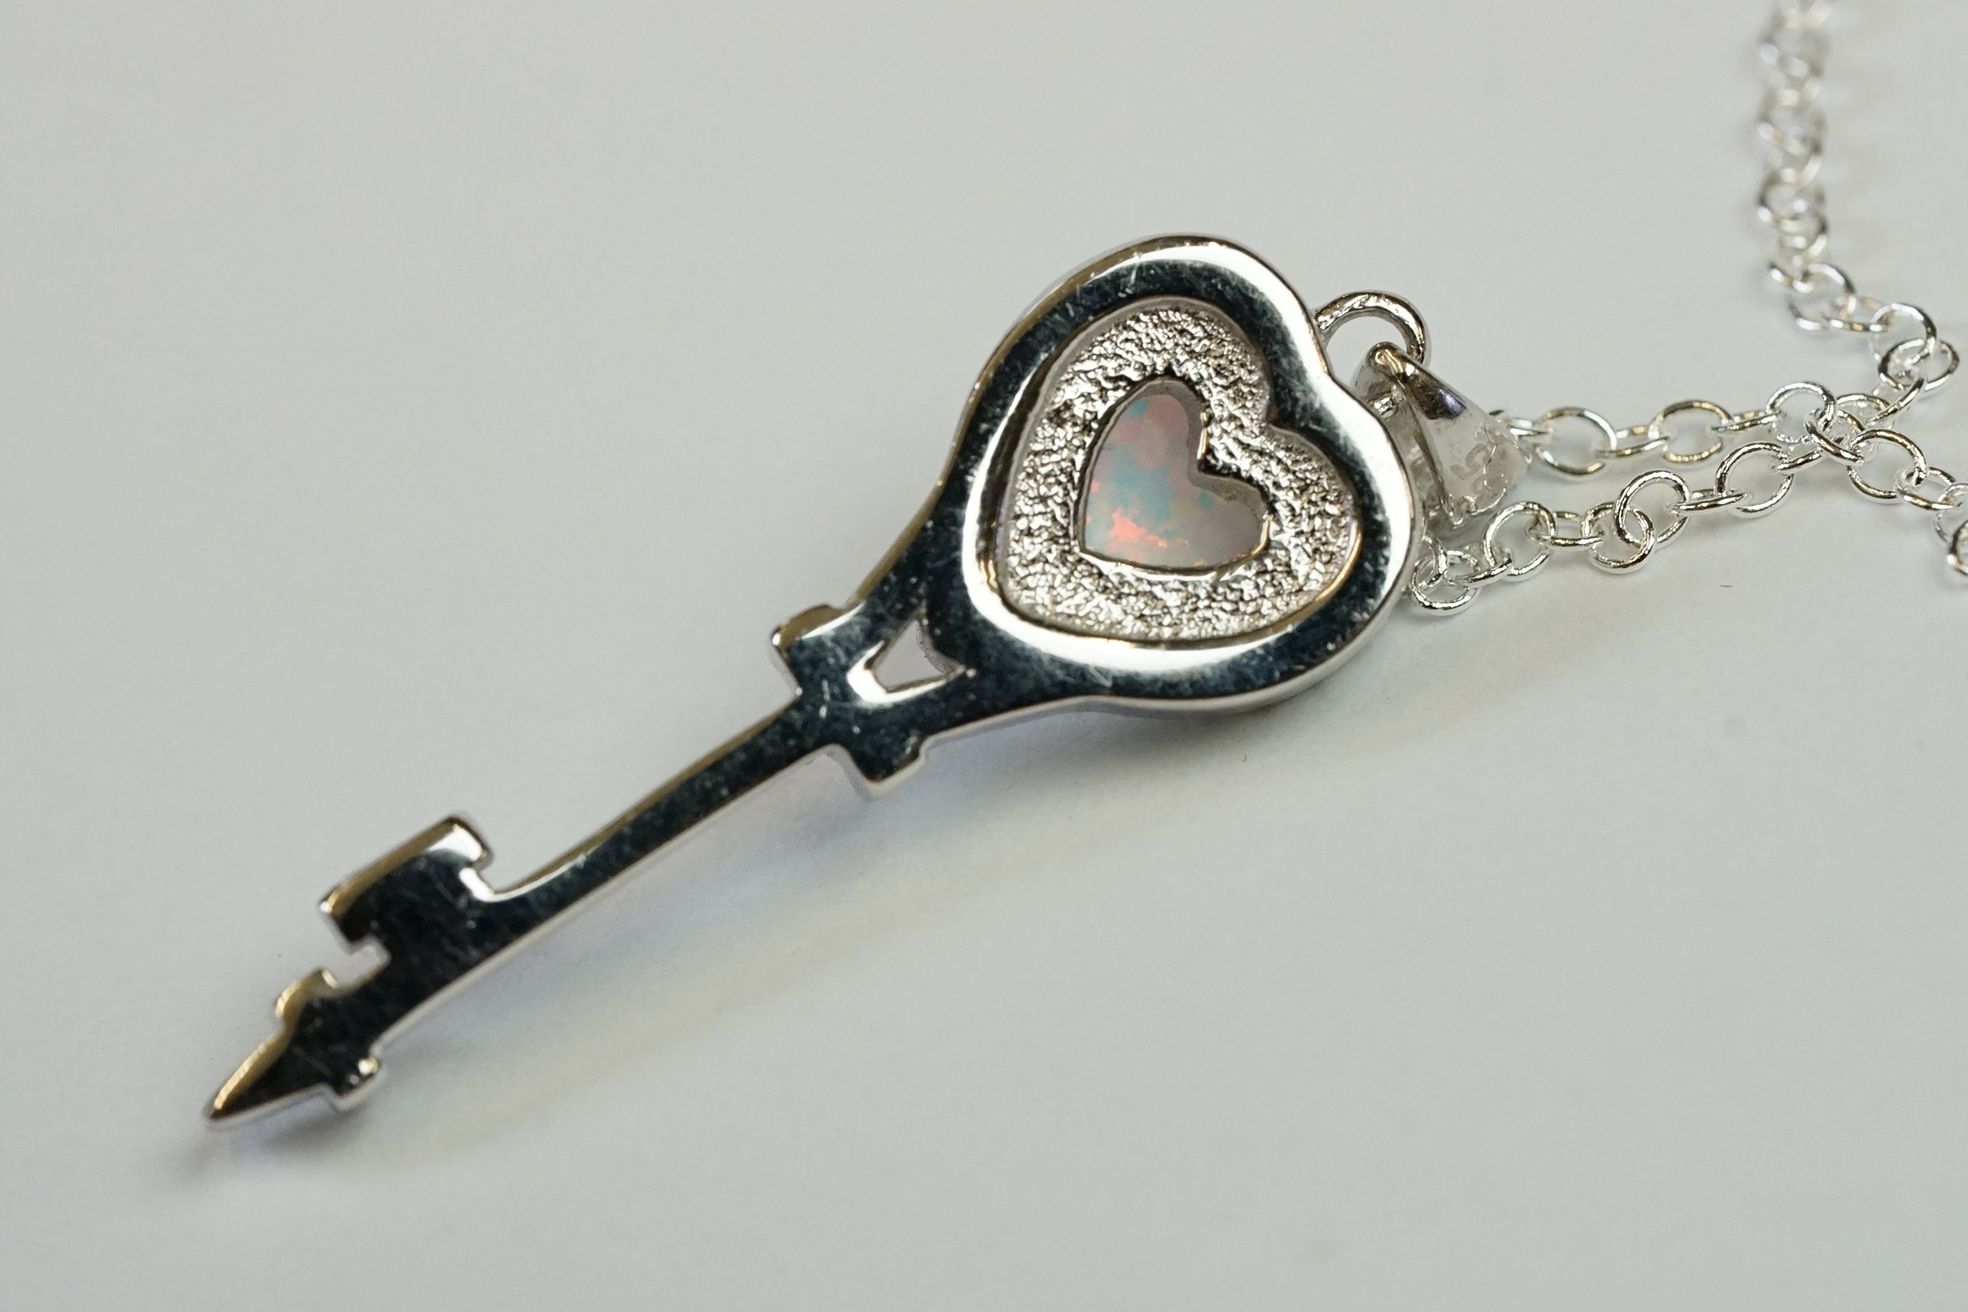 Silver CZ and Opal Key shaped Tiffany style Pendant Necklace - Image 4 of 7